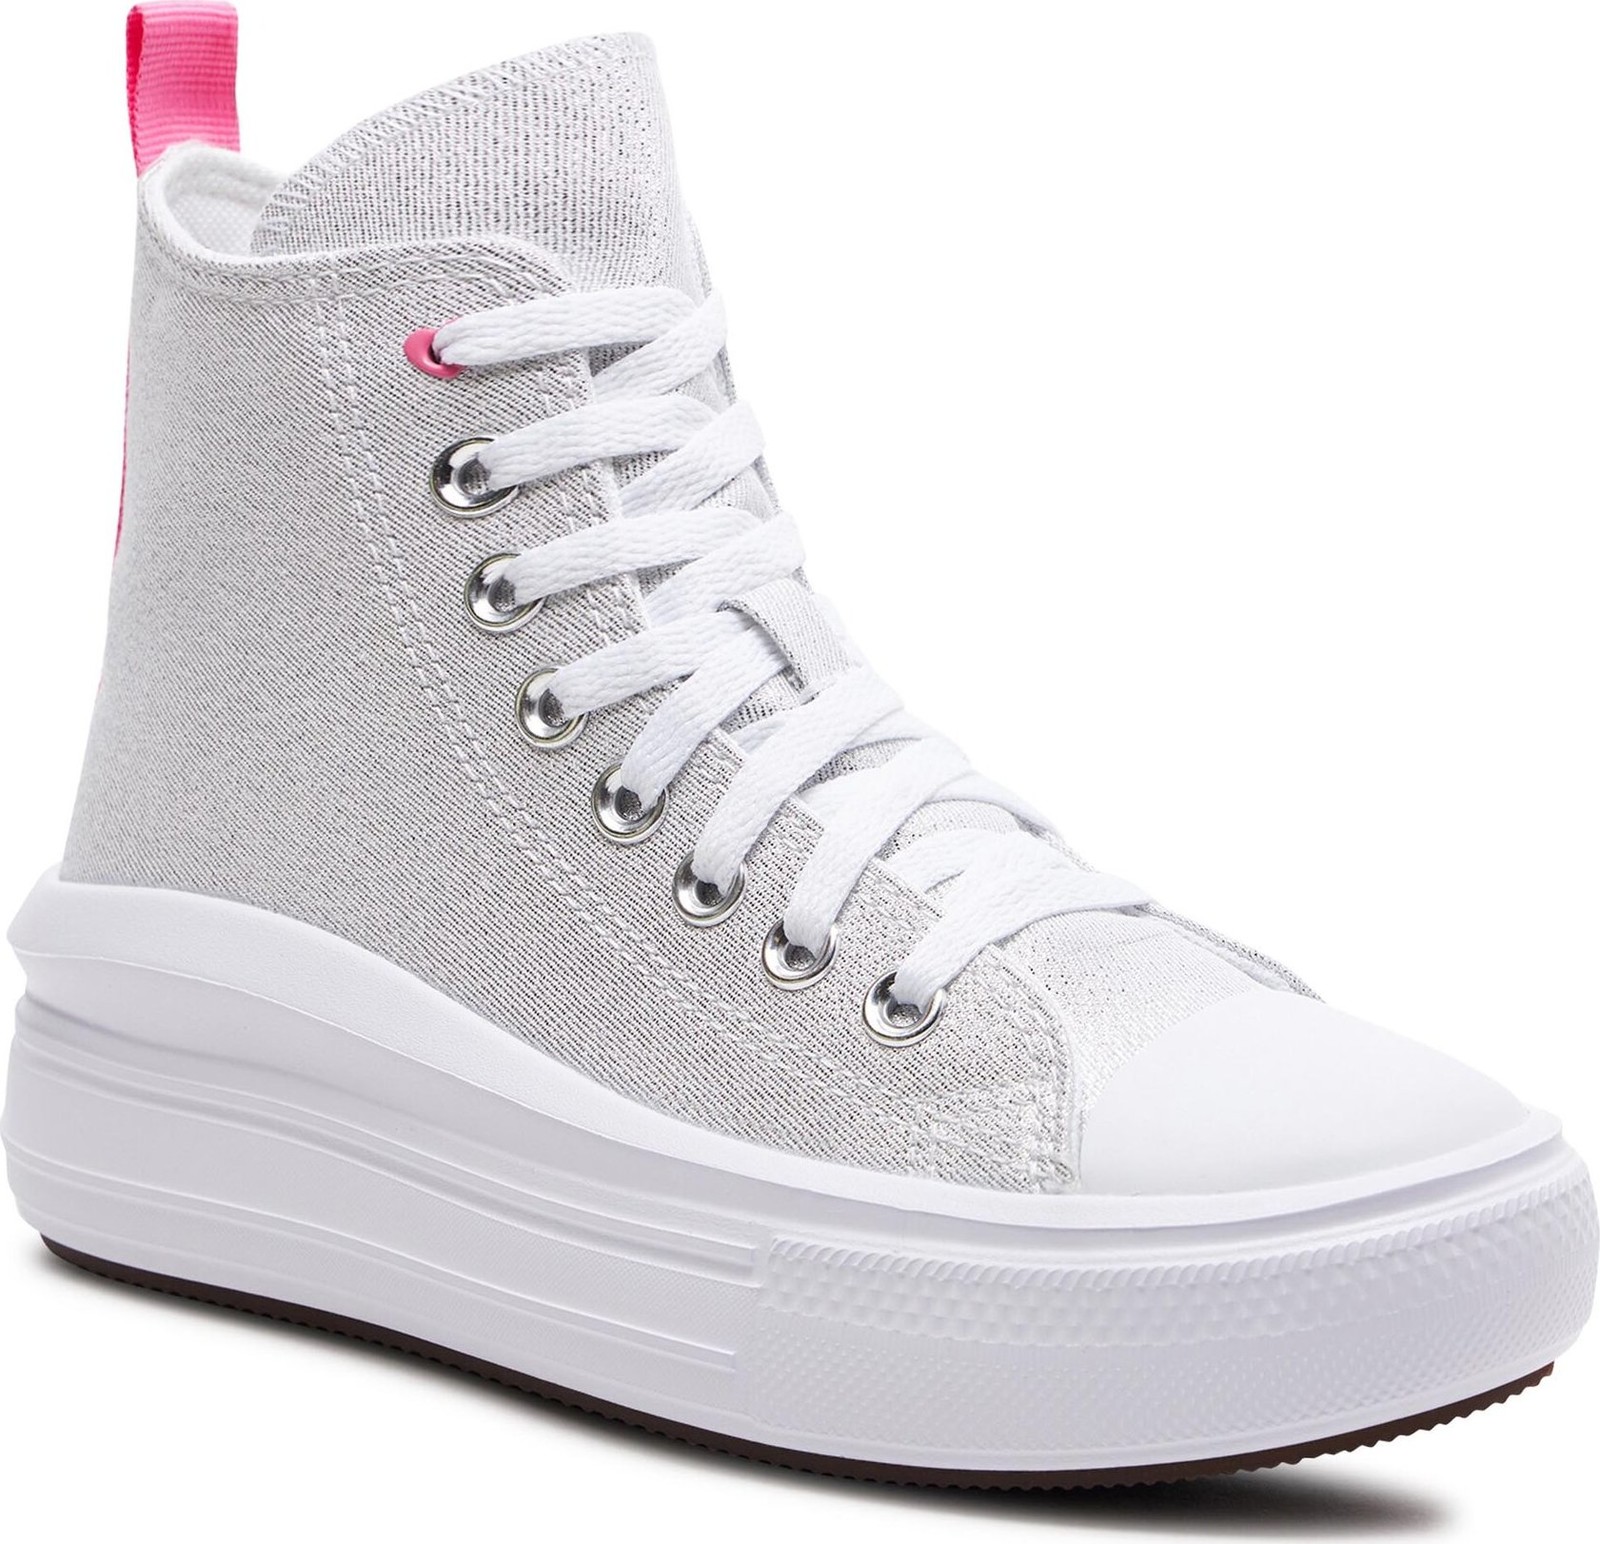 Plátěnky Converse Chuck Taylor All Star Move Platform Sparkle A06332C White/Oops Pink/White